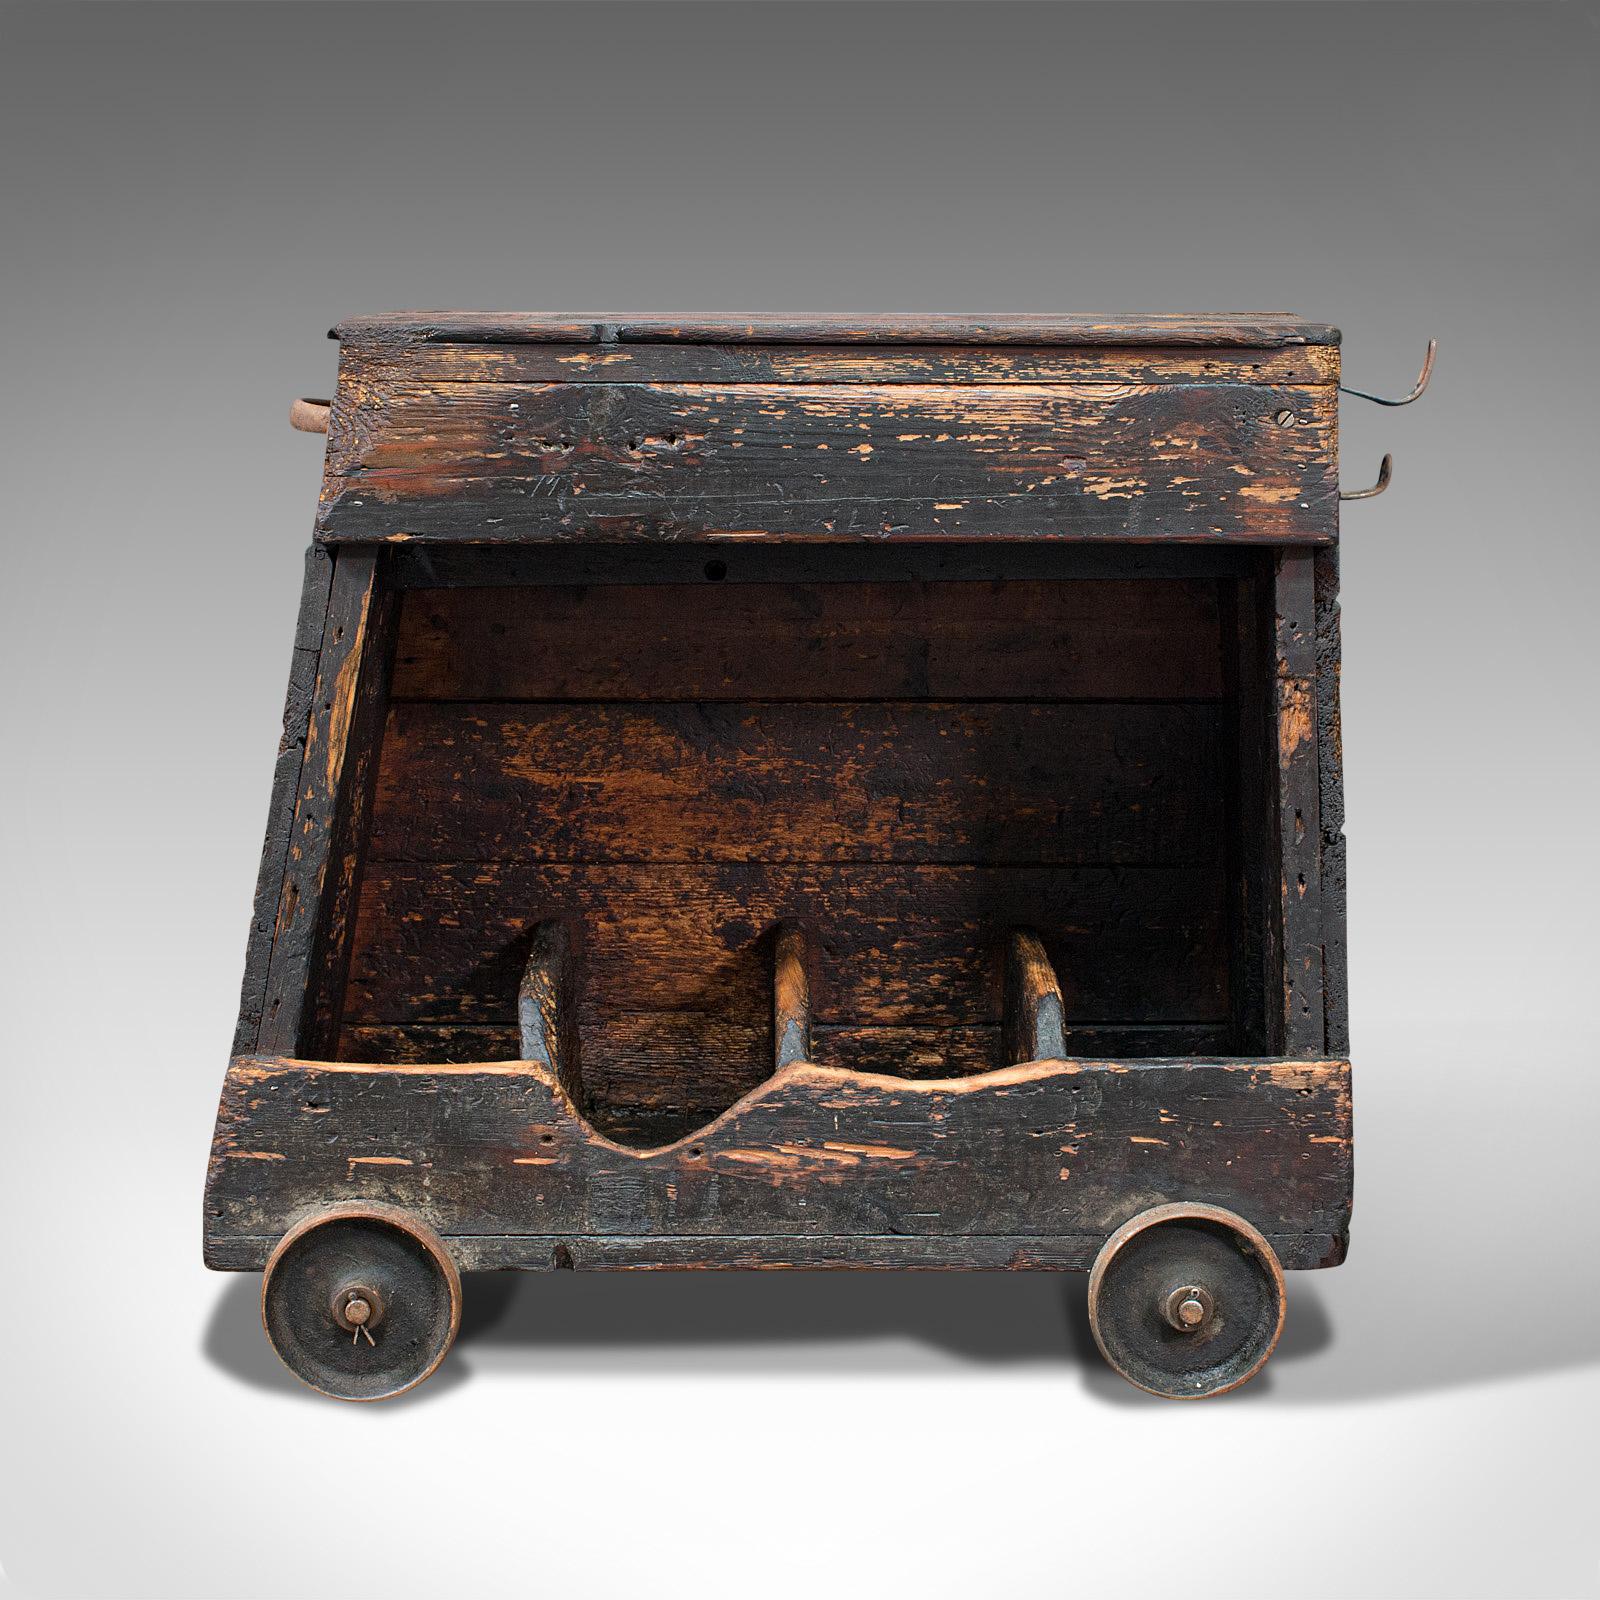 This is an antique industrial machinist's truck. An English, pine trolley suitable for the kitchen or wine, dating to the late Victorian period, circa 1900.

Wonderfully naive but solidly crafted mobile caddy
Displaying a desirable industrial